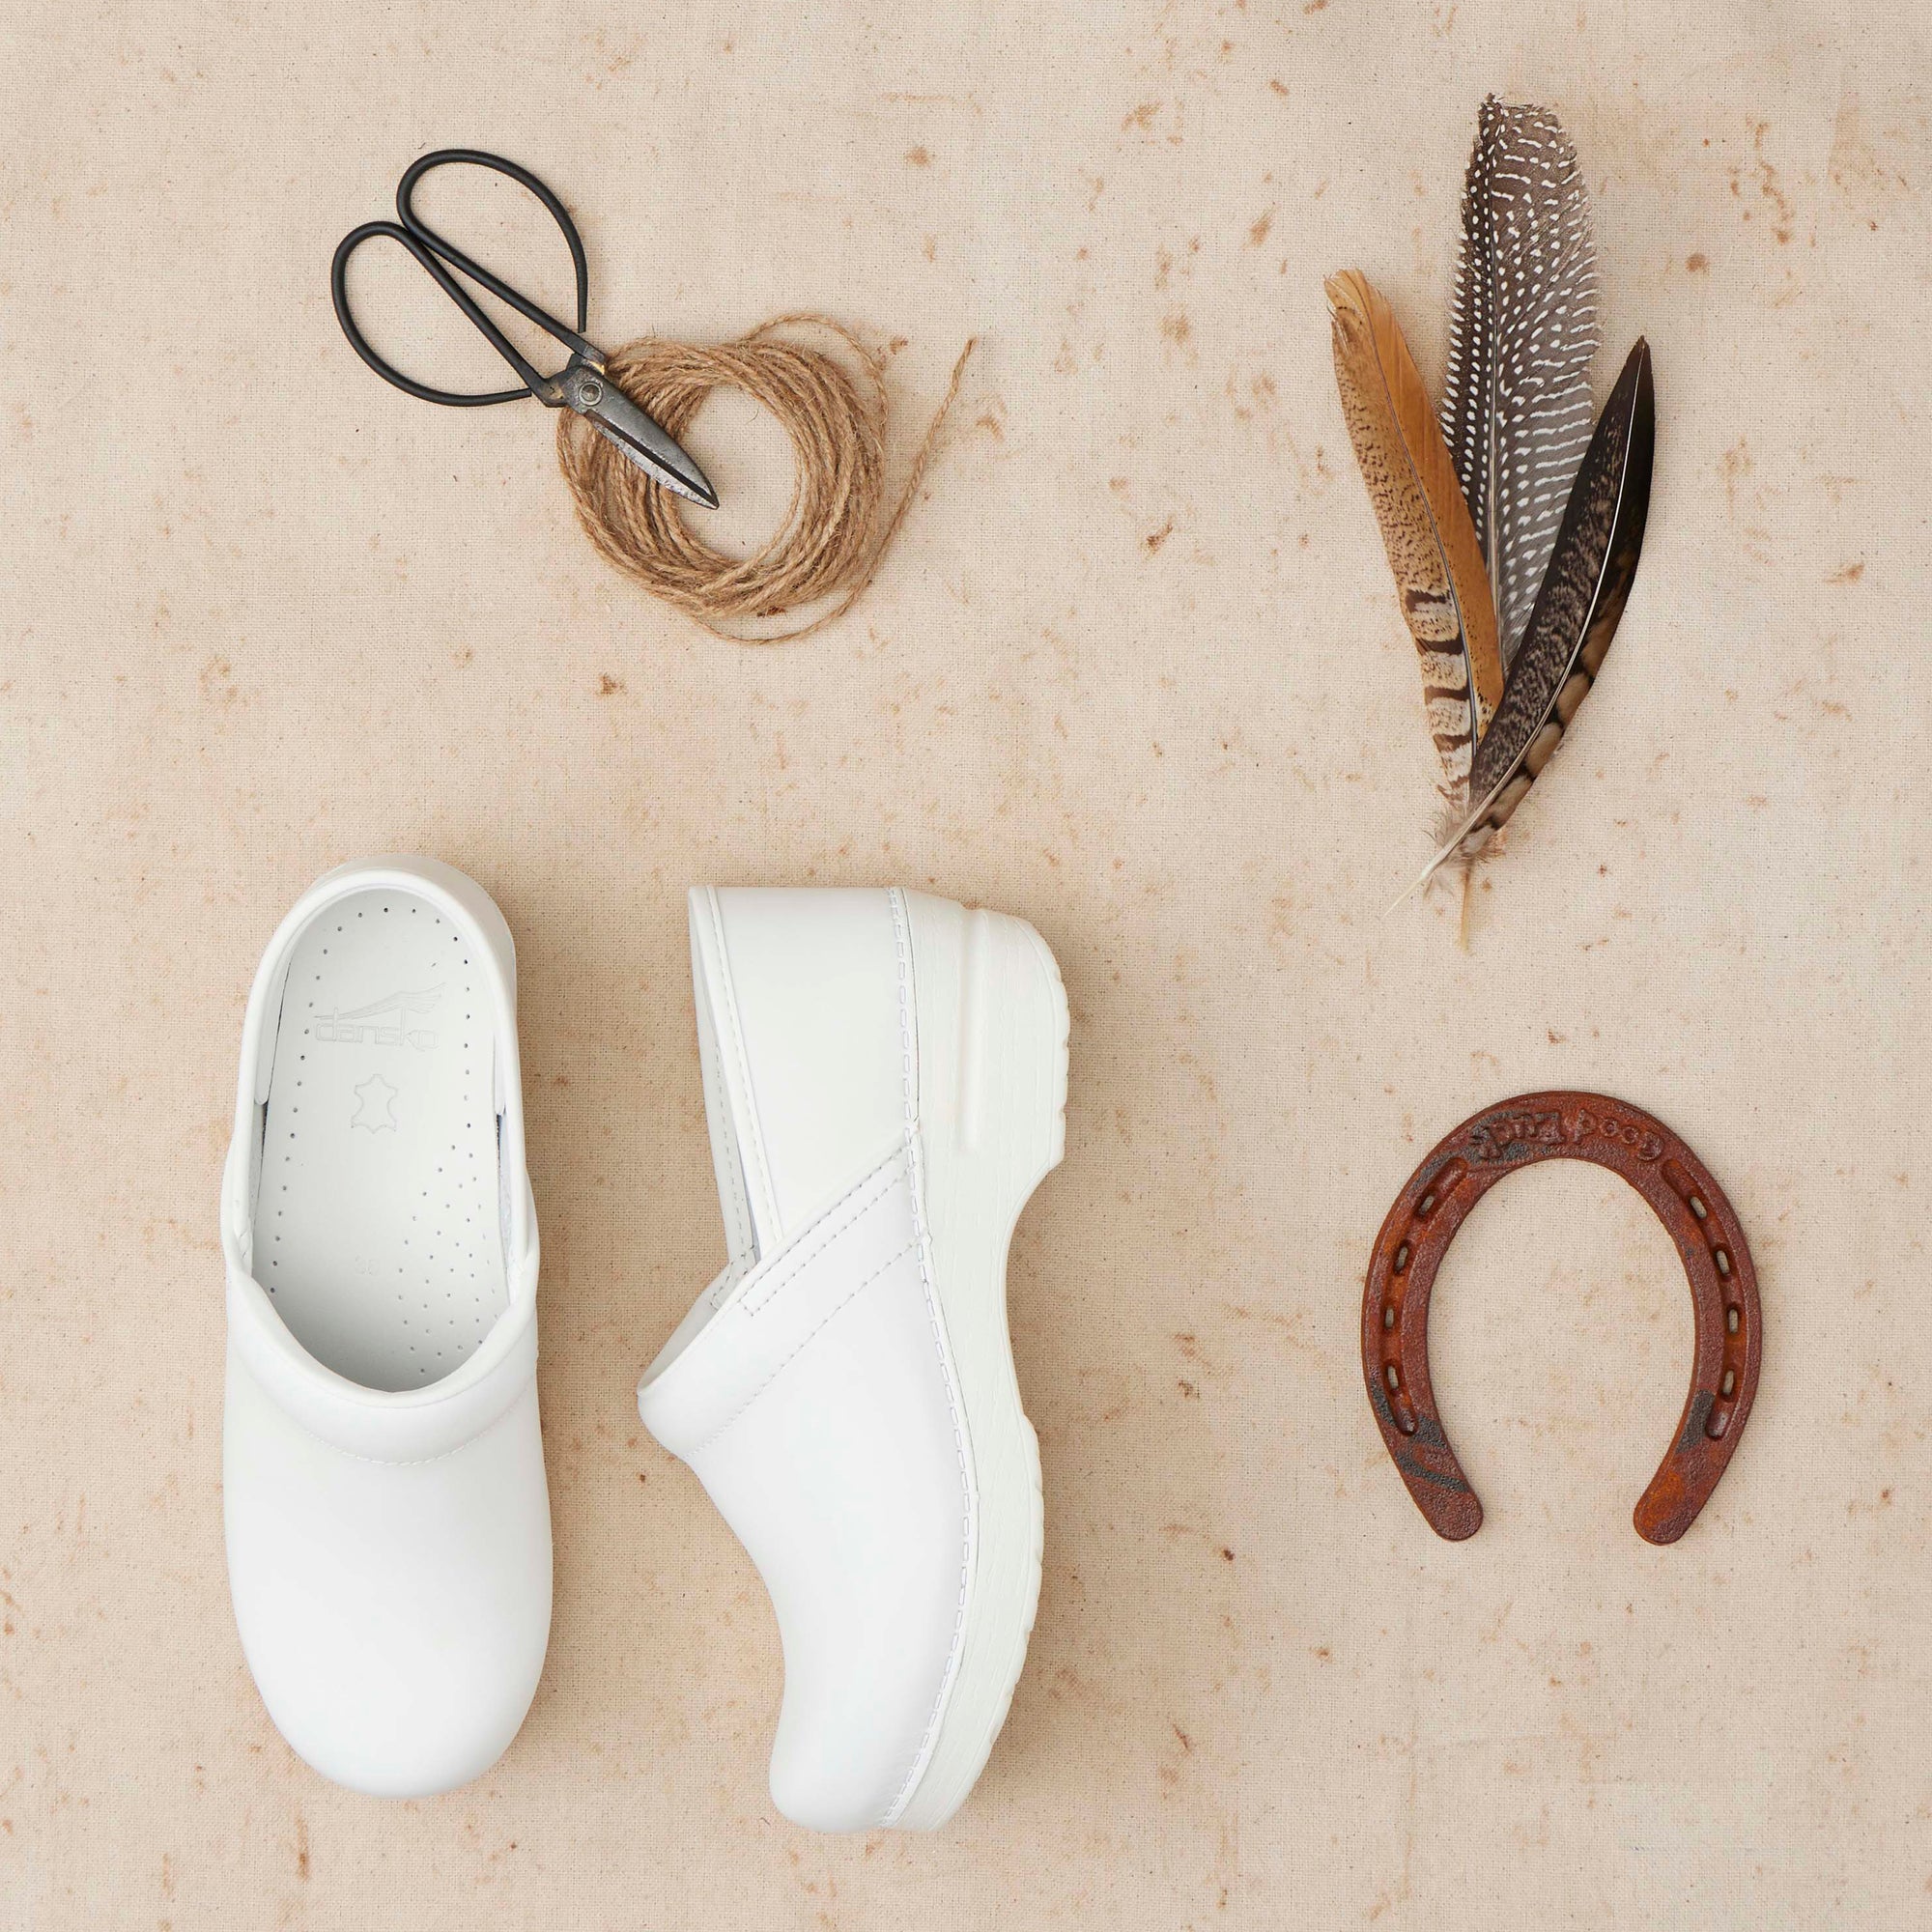 Stylish white clogs shown with barn materials.